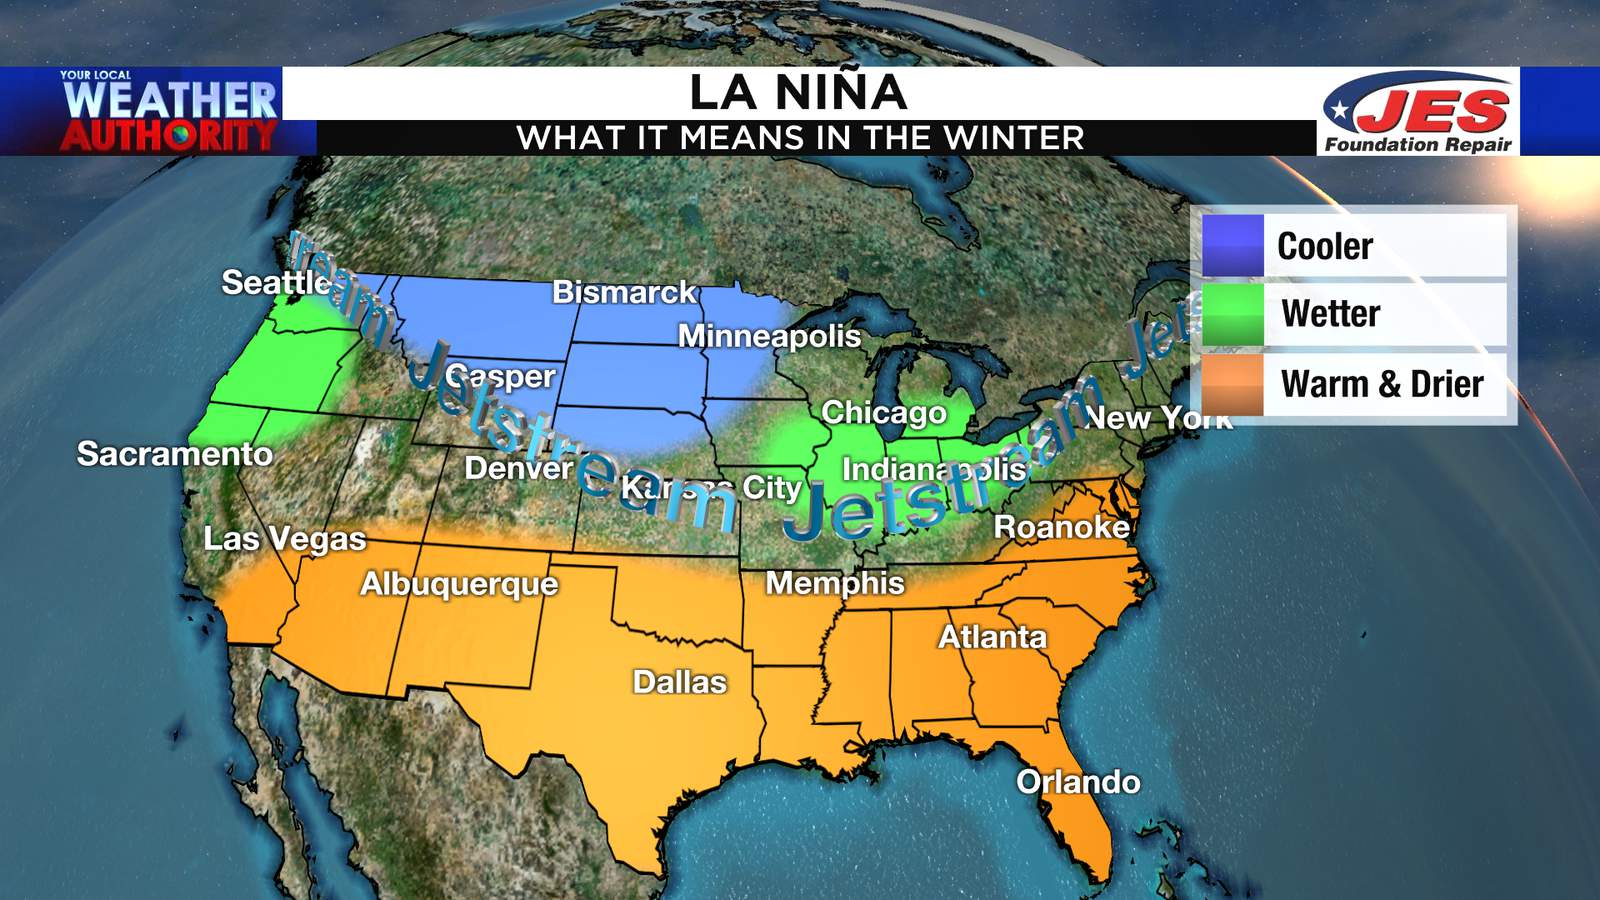 With La Nia likely, we could see below-average snowfall this winter